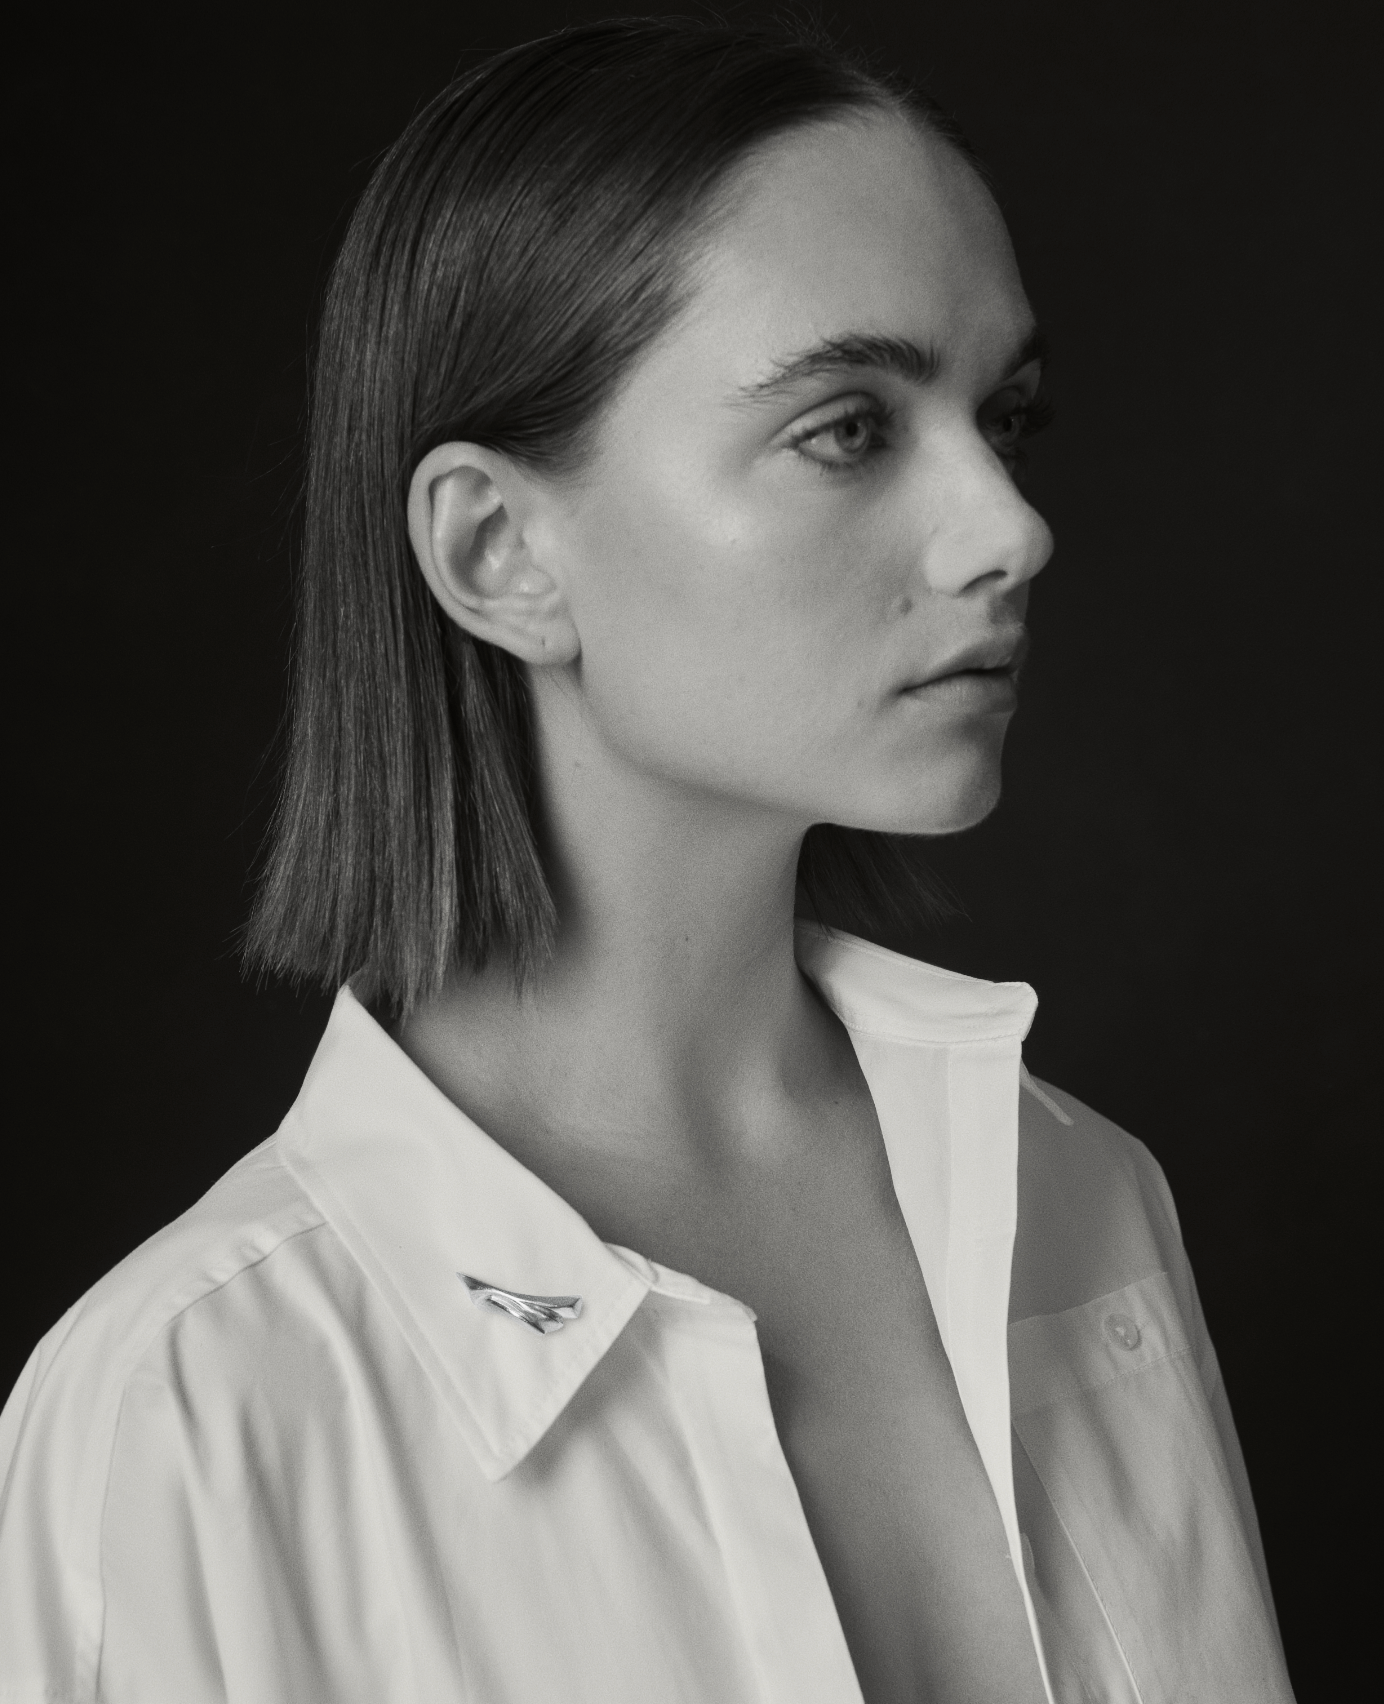 black and white image of i seira model wearing a white shirt with the sculptural gold pin on the collar